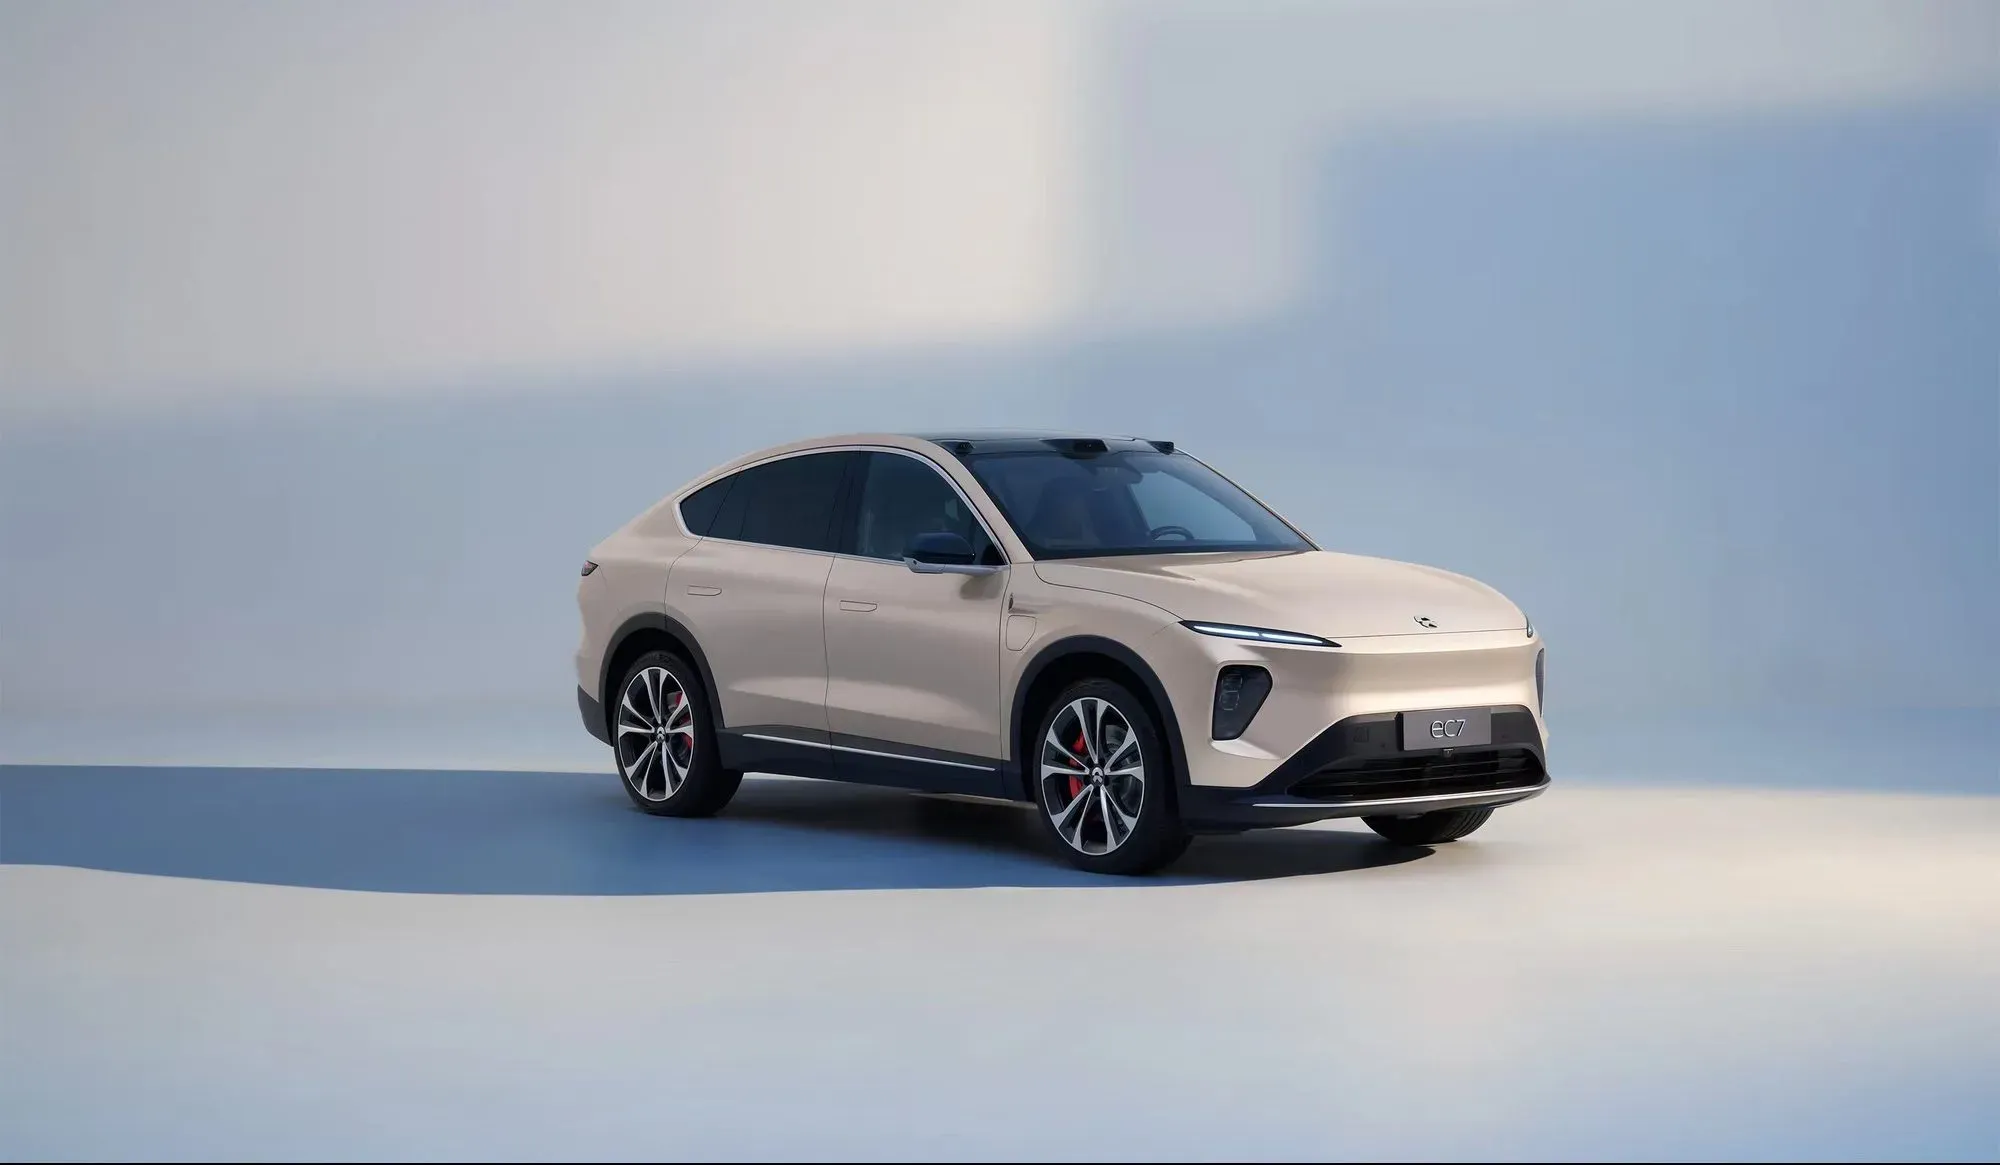 The New NIO EC7 Flagship Coupe SUV Come With 572 Miles Of Ranges